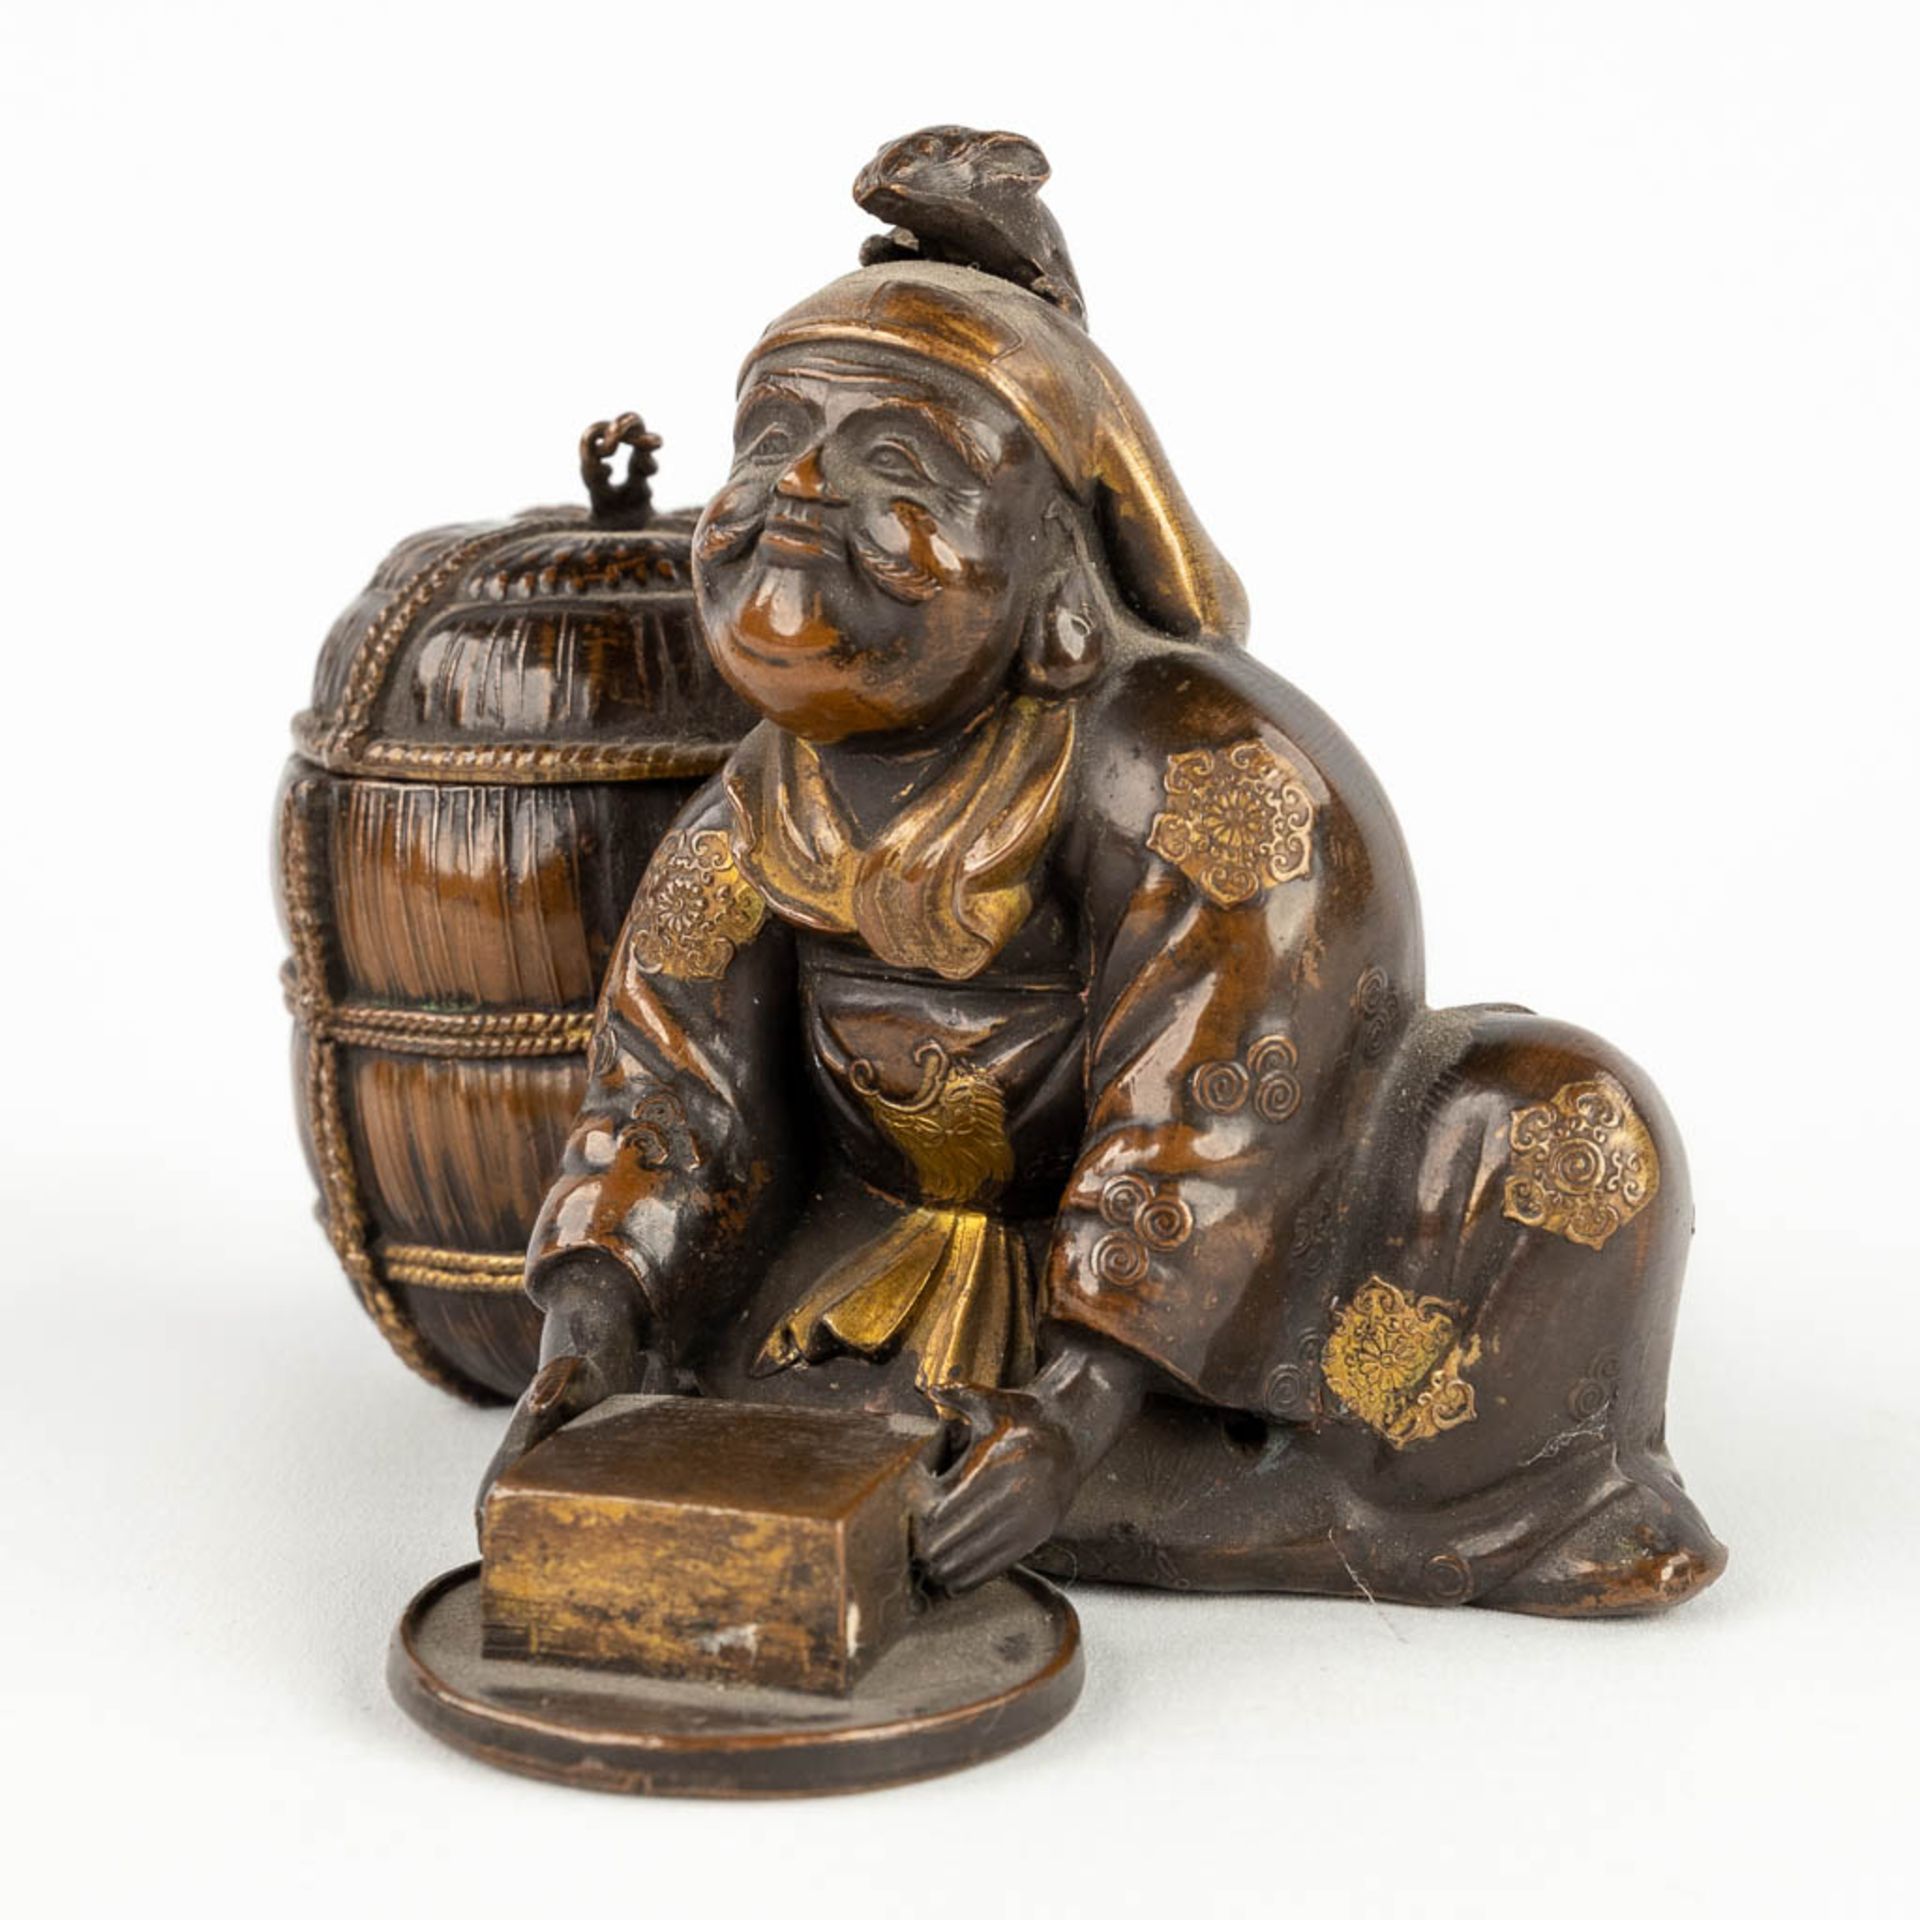 A figurative ink pot, bronze, Oriental figurine with a mouse. 19th century. (L: 8 x W: 10 x H: 8 cm) - Image 8 of 14